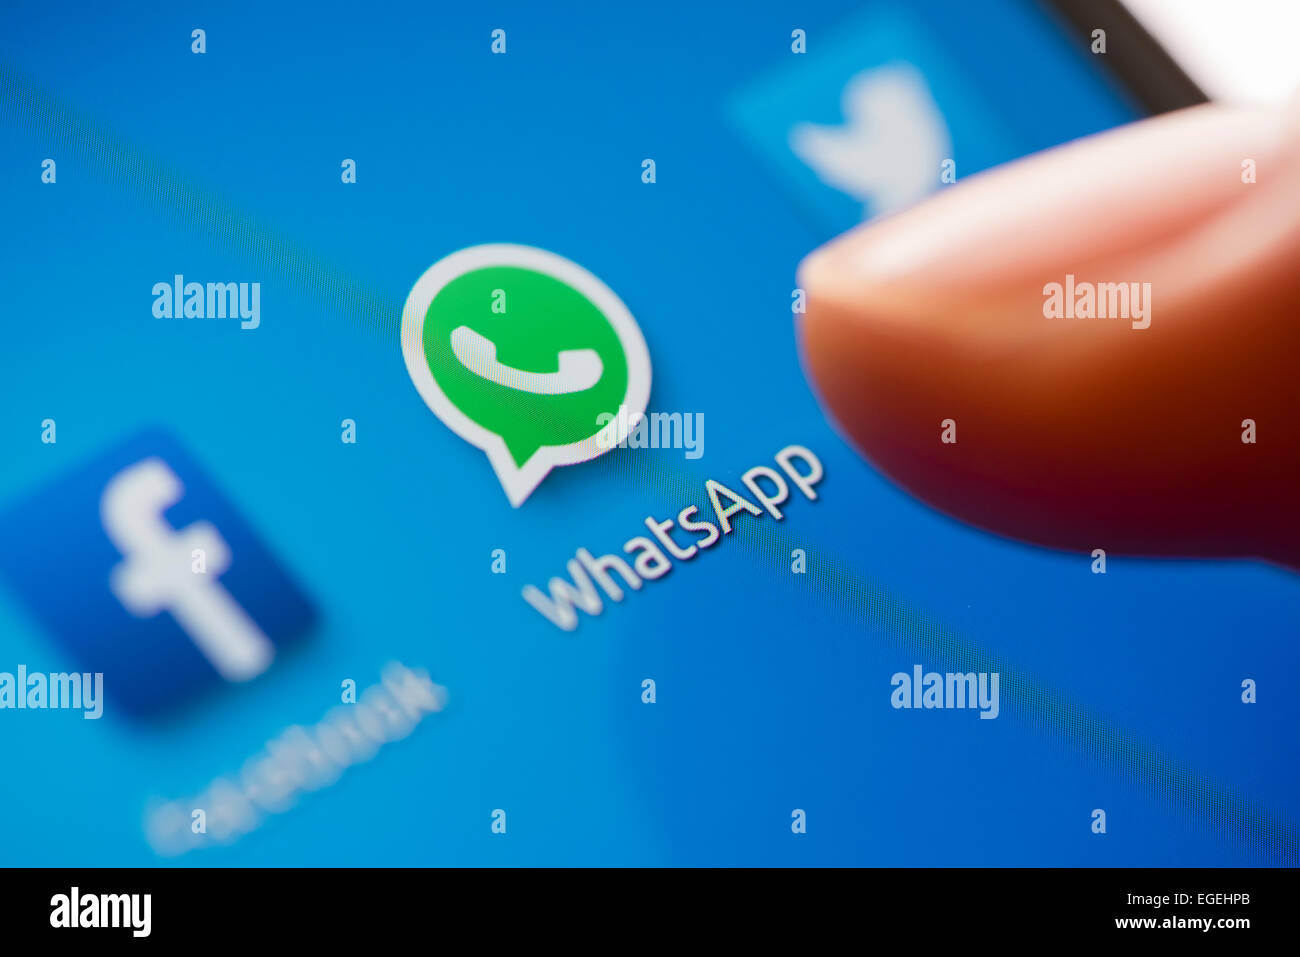 A smartphone user's finger above the icon of 'WhatsApp', facebook and twitter apps on a mobile phone's touchscreen. Stock Photo